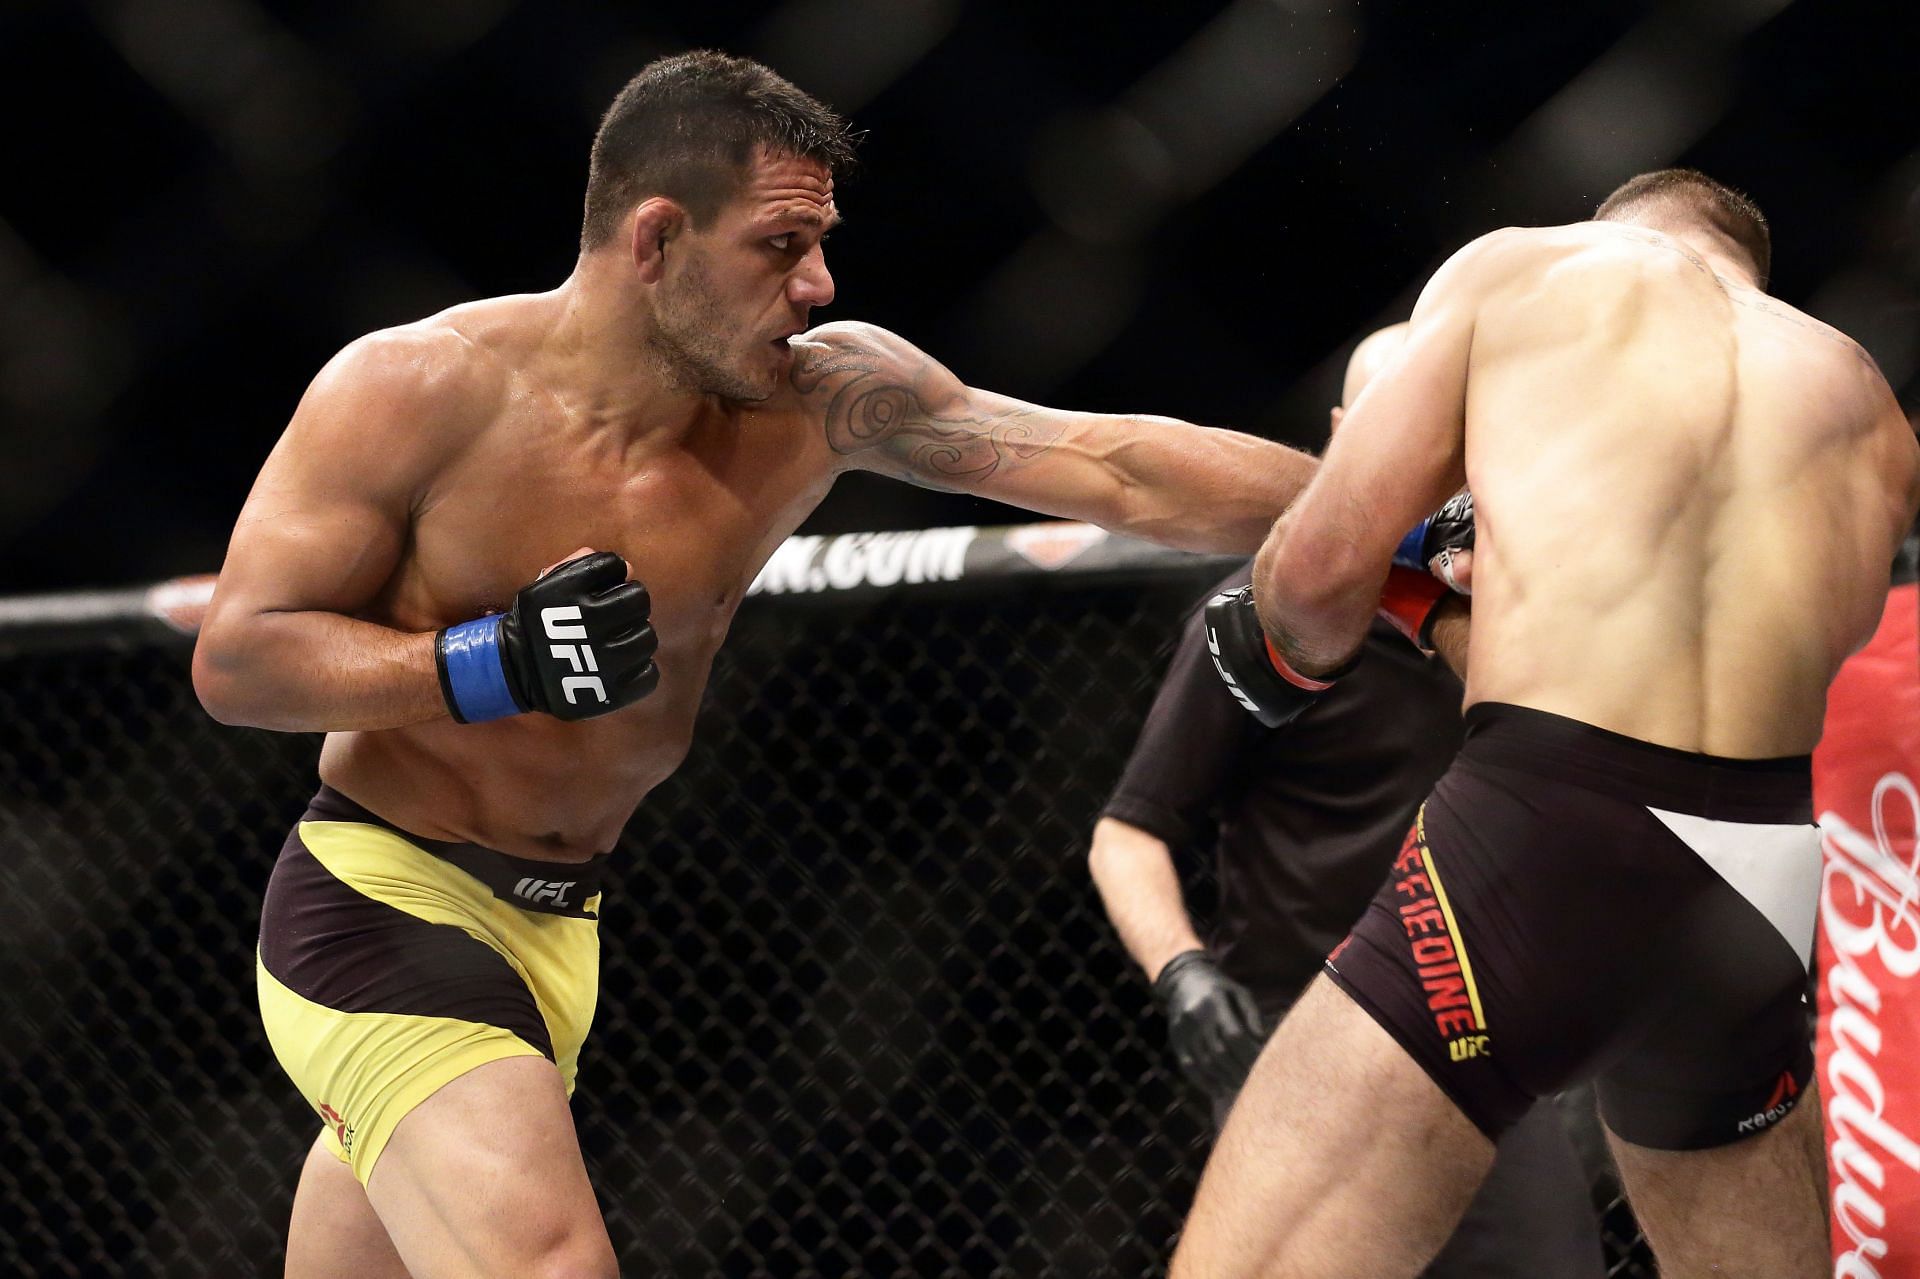 Dos Anjos earned a split decision victory over Paul Felder in his last fight